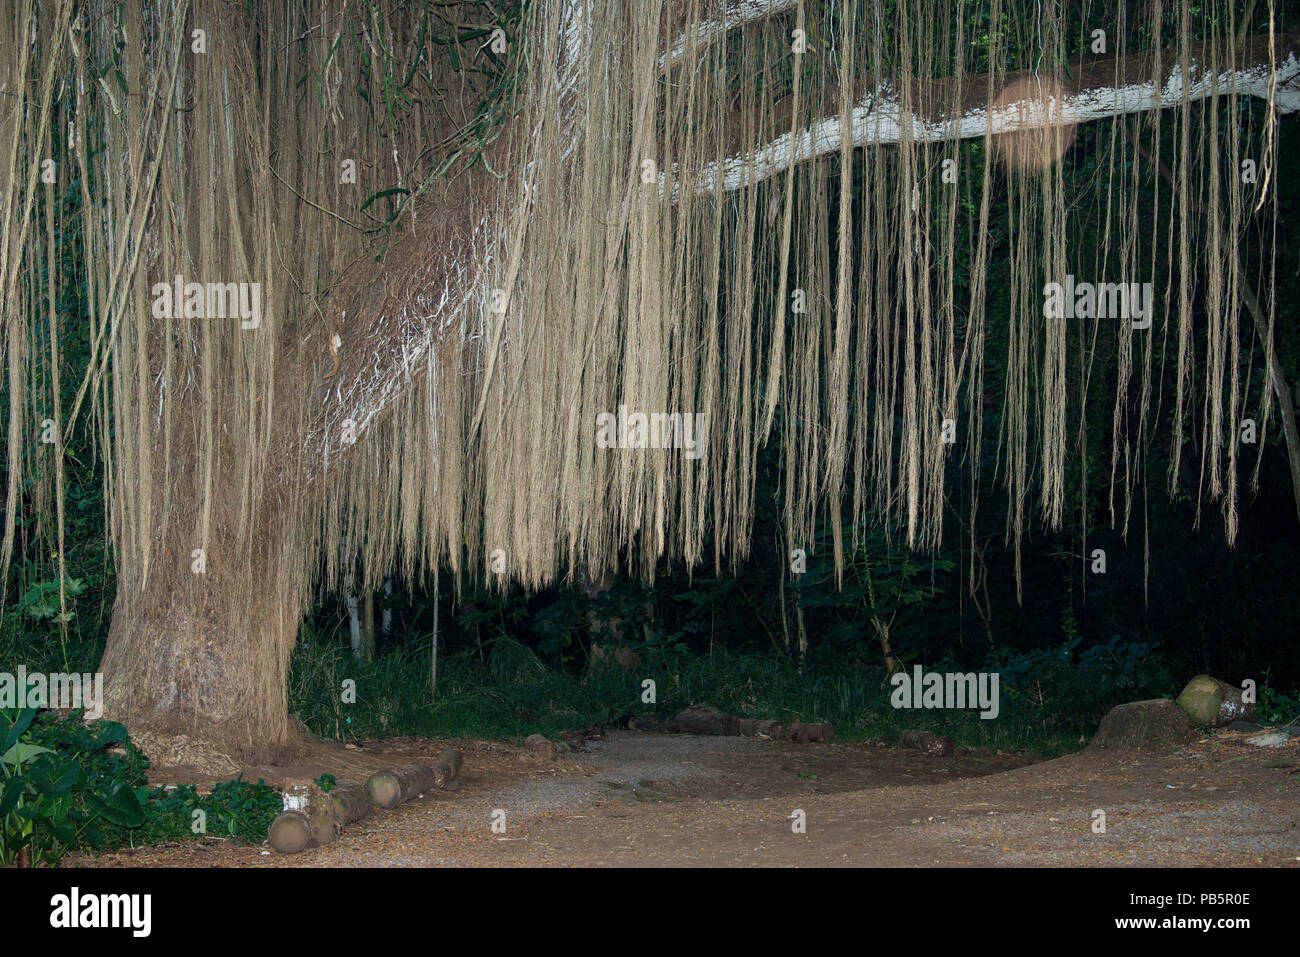 Maui, Hawaii. Hanging Prop Roots of a Banyan Tree in Honolua Park. Stock Photo